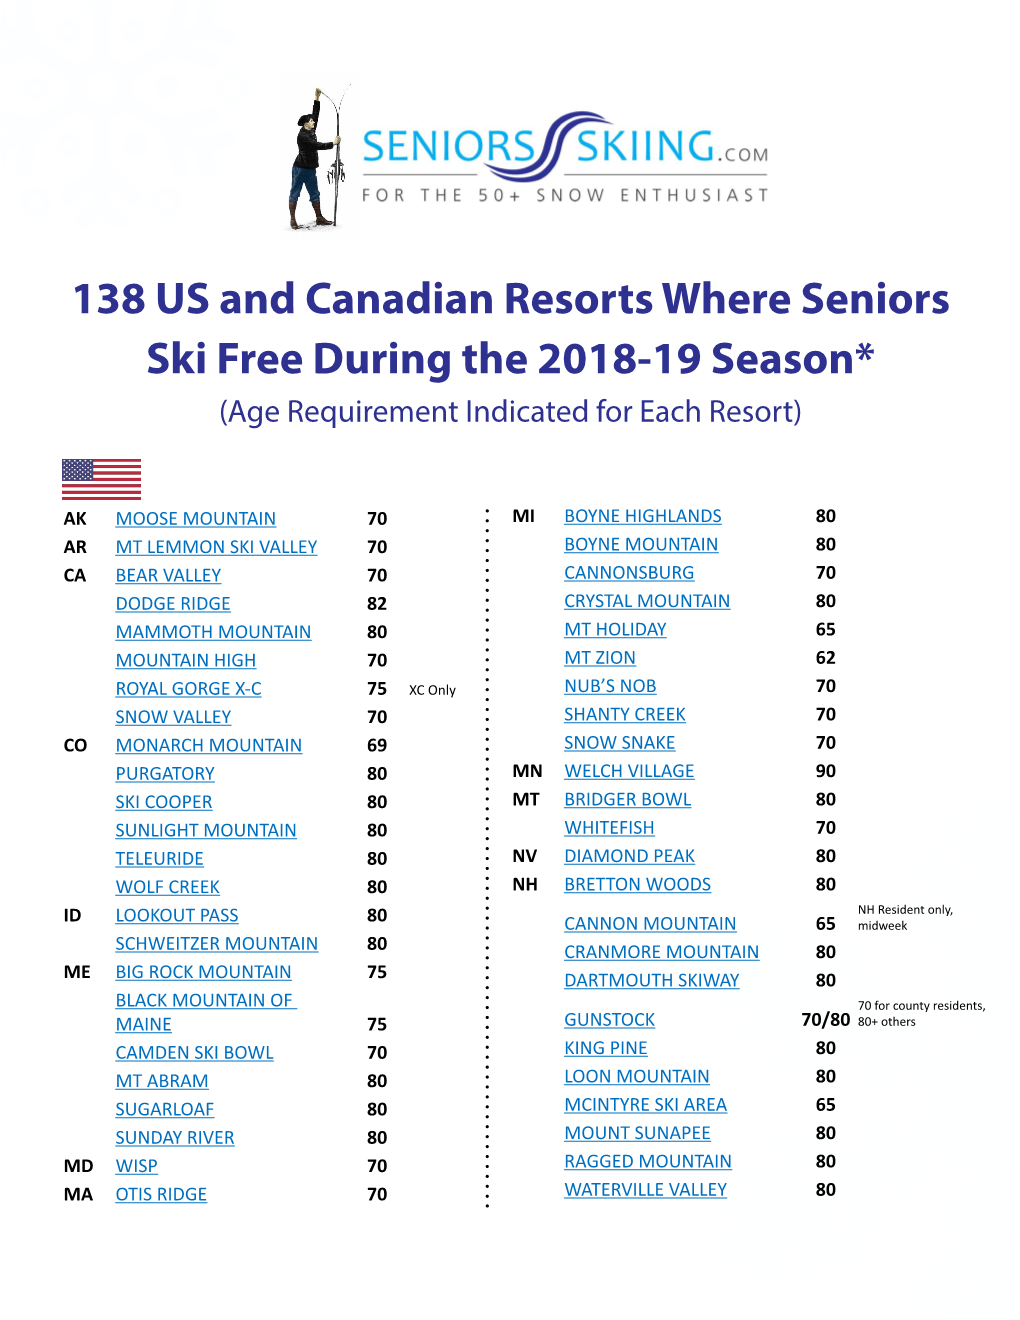 138 US and Canadian Resorts Where Seniors Ski Free During the 2018-19 Season* (Age Requirement Indicated for Each Resort)